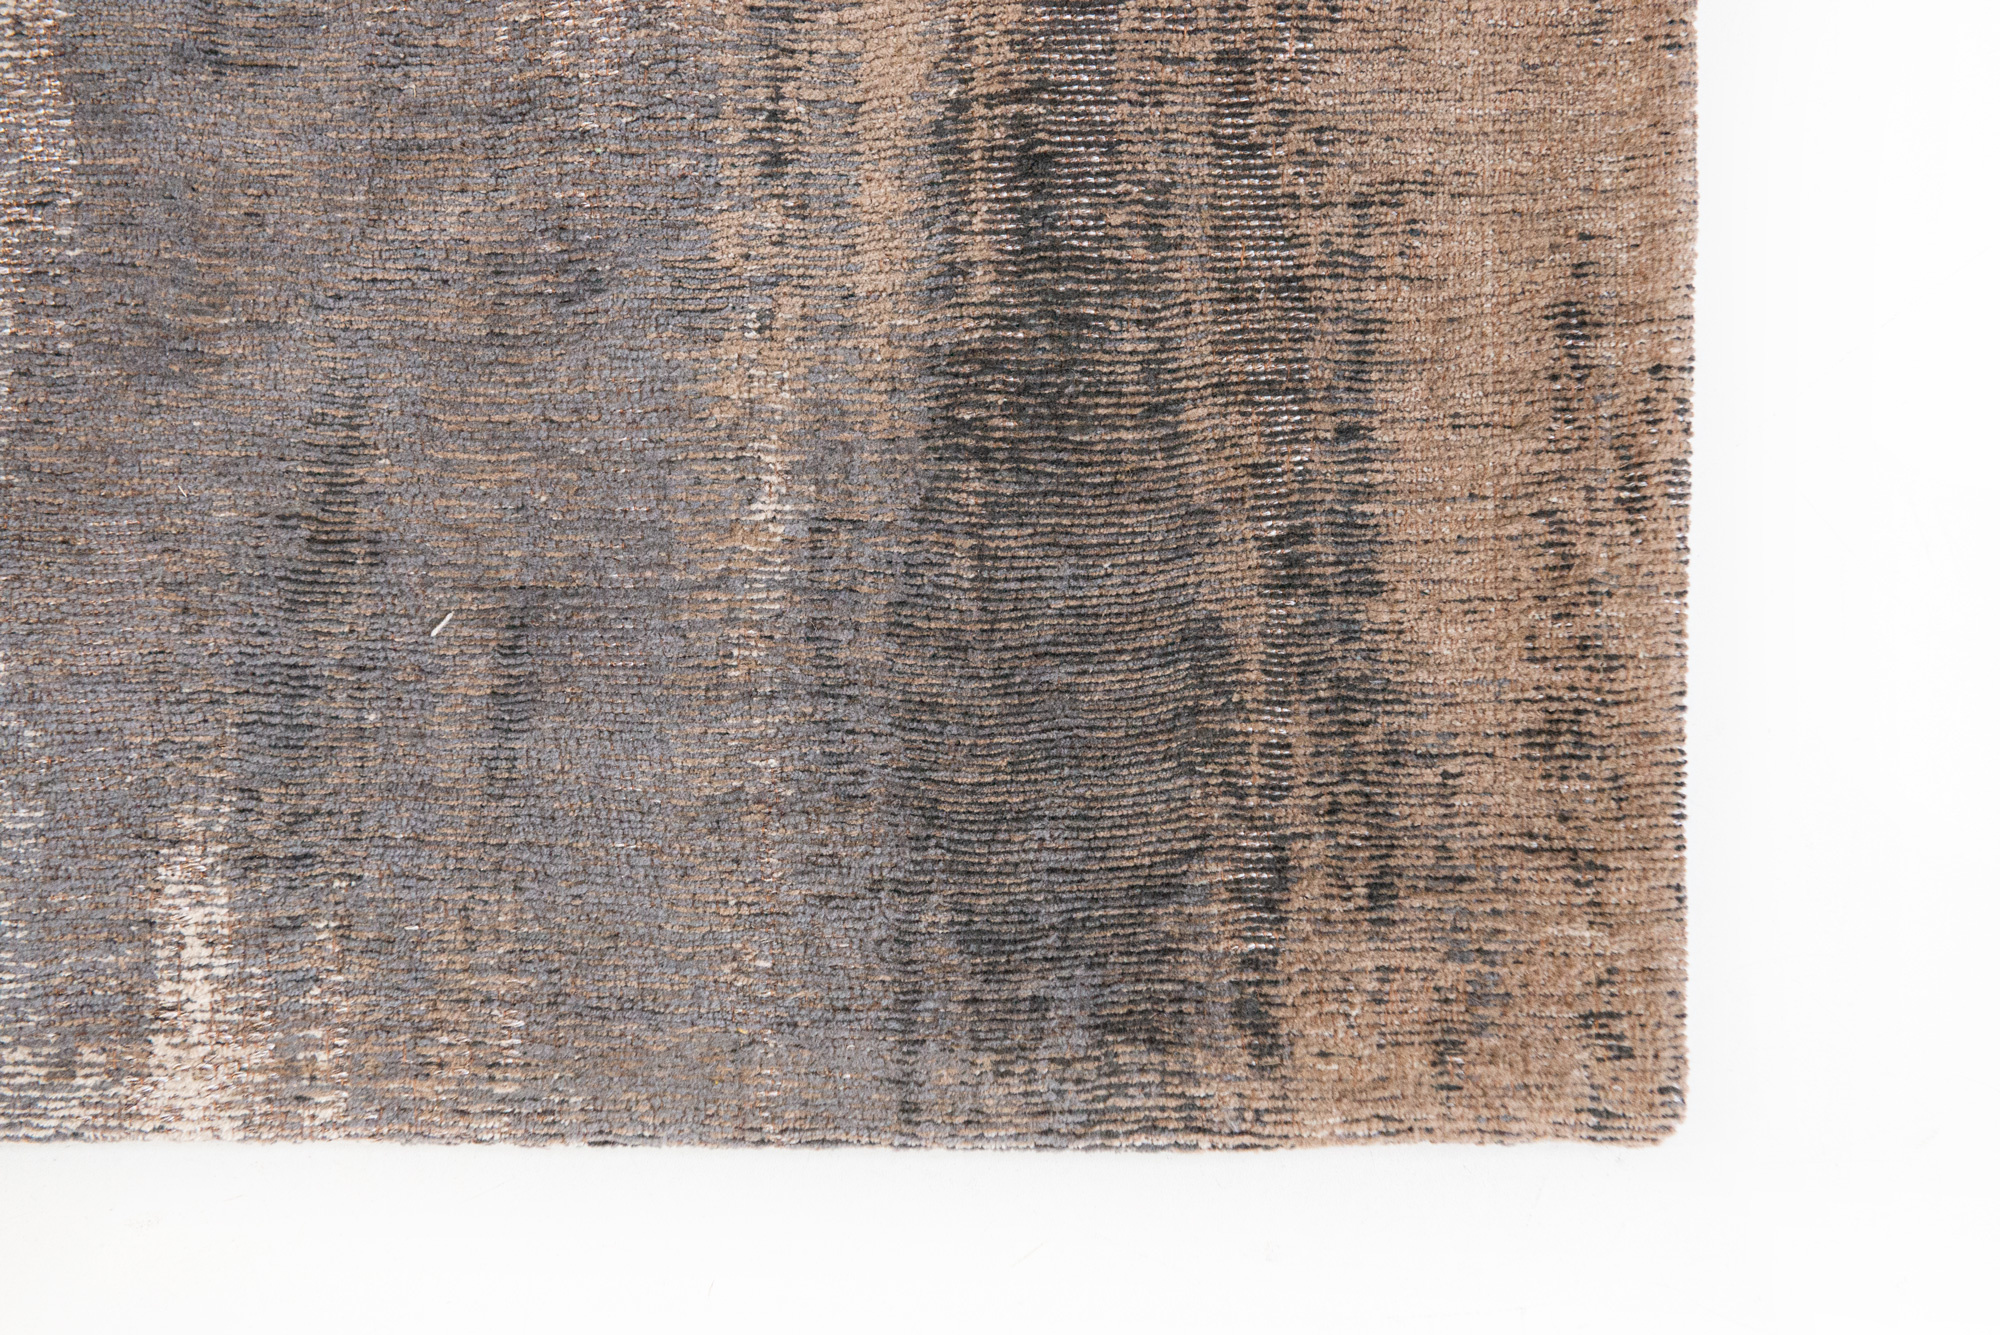 Abstract Flatwoven Beige Rug ☞ Size: 5' 7" x 8' (170 x 240 cm)